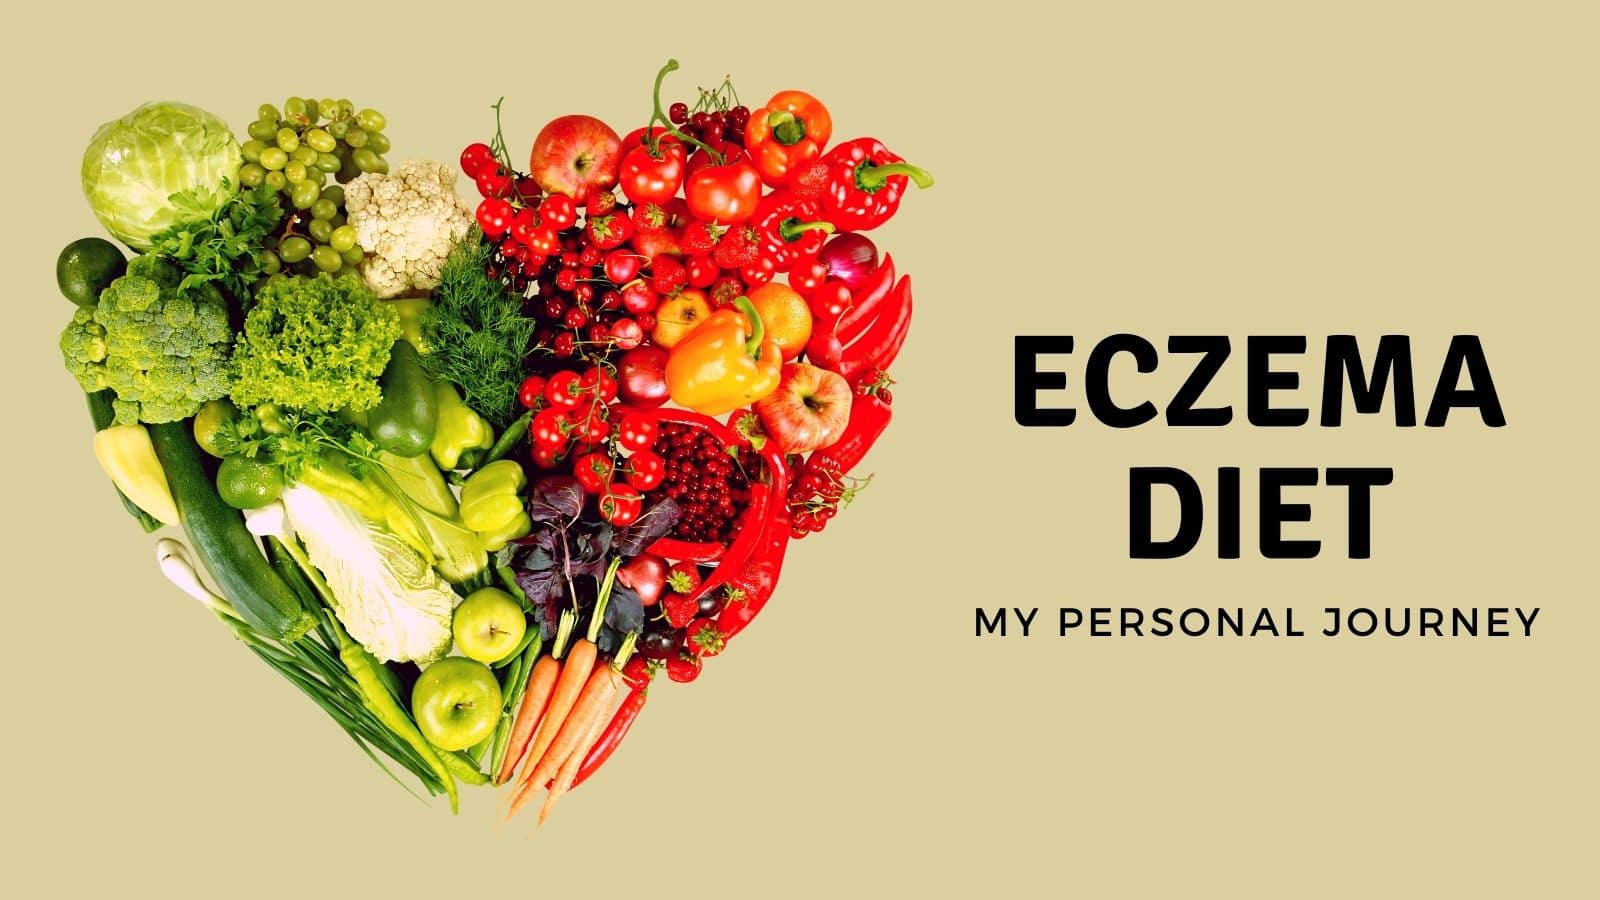 How I adjusted my diet and learn what to eat and not eat with eczema